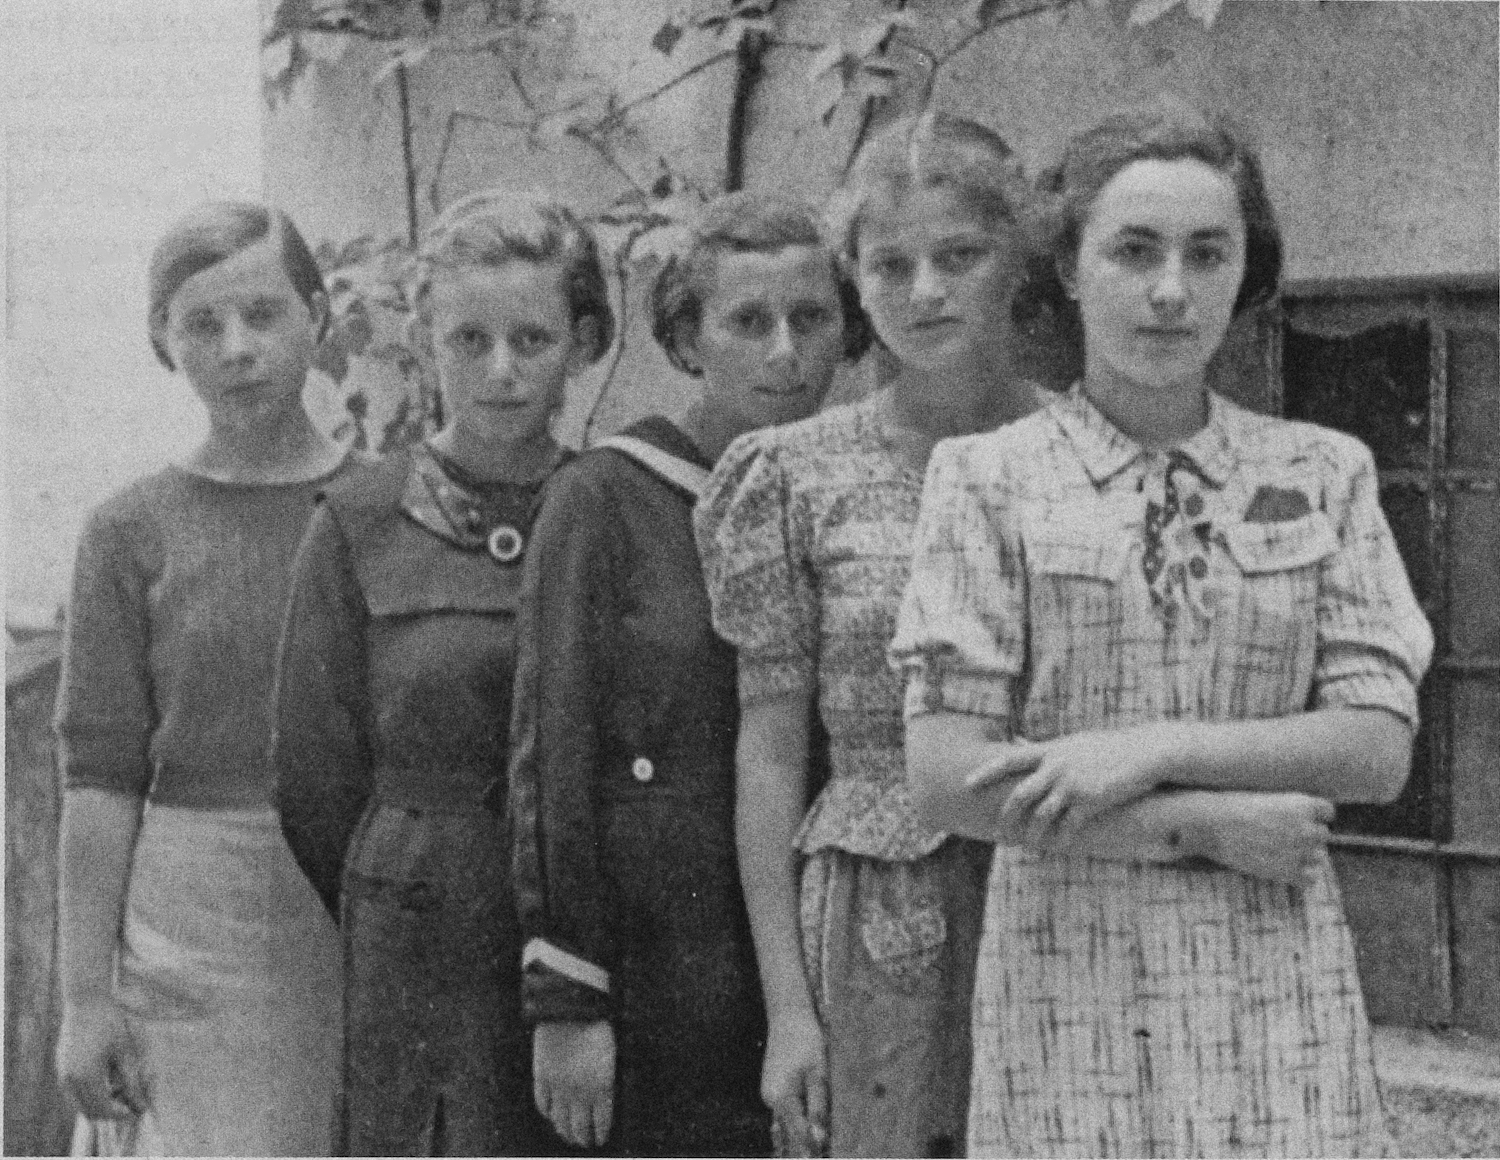 A group of teenage girls from the town of Humenné, Slovakia, c. 1936. From left to right: an unidentified girl, Anna Herskovicova, another unidentified girl, Lea Friedman and Debora Gross (sister of Adela Gross). Adela Gross and Lea Friedman were two of the 999 unmarried Jewish women and girls on the first official transport of Jews to Auschwitz. (Friedman family photos, courtesy of Edith Grosman)